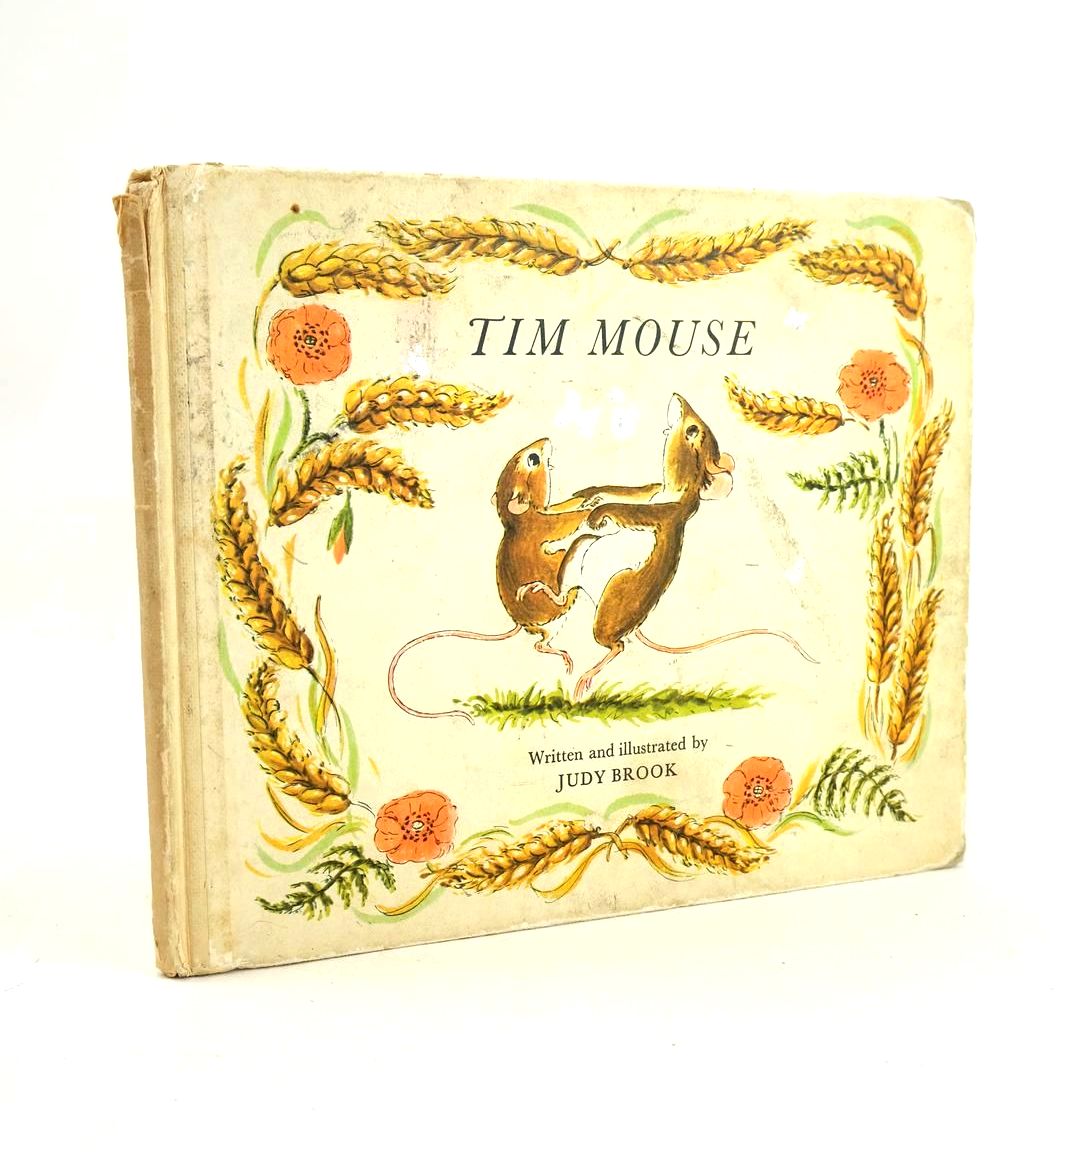 Photo of TIM MOUSE written by Brook, Judy illustrated by Brook, Judy published by World's Work Ltd. (STOCK CODE: 1327906)  for sale by Stella & Rose's Books